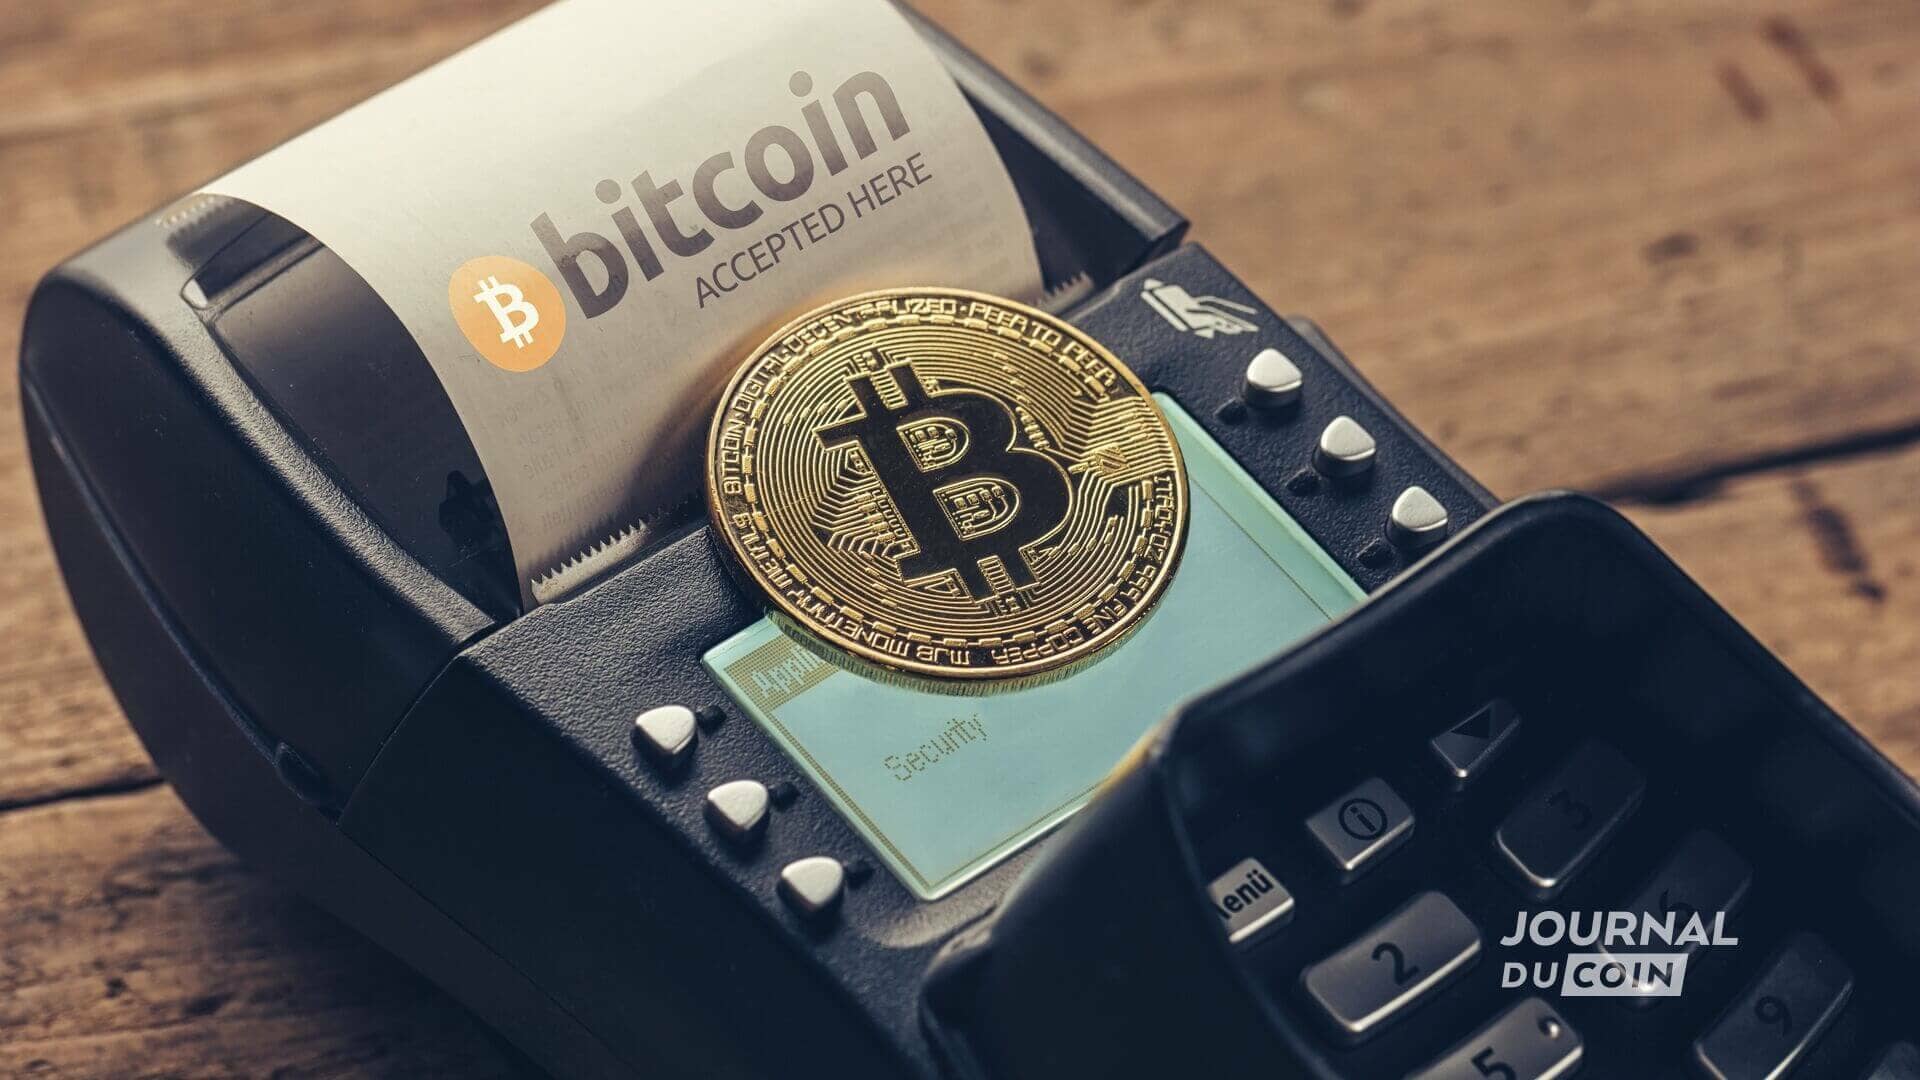 With Utrust it is already possible to pay for purchases in bitcoin.  Thanks to Elrond, merchants around the world will be able to further improve their crypto payment solutions